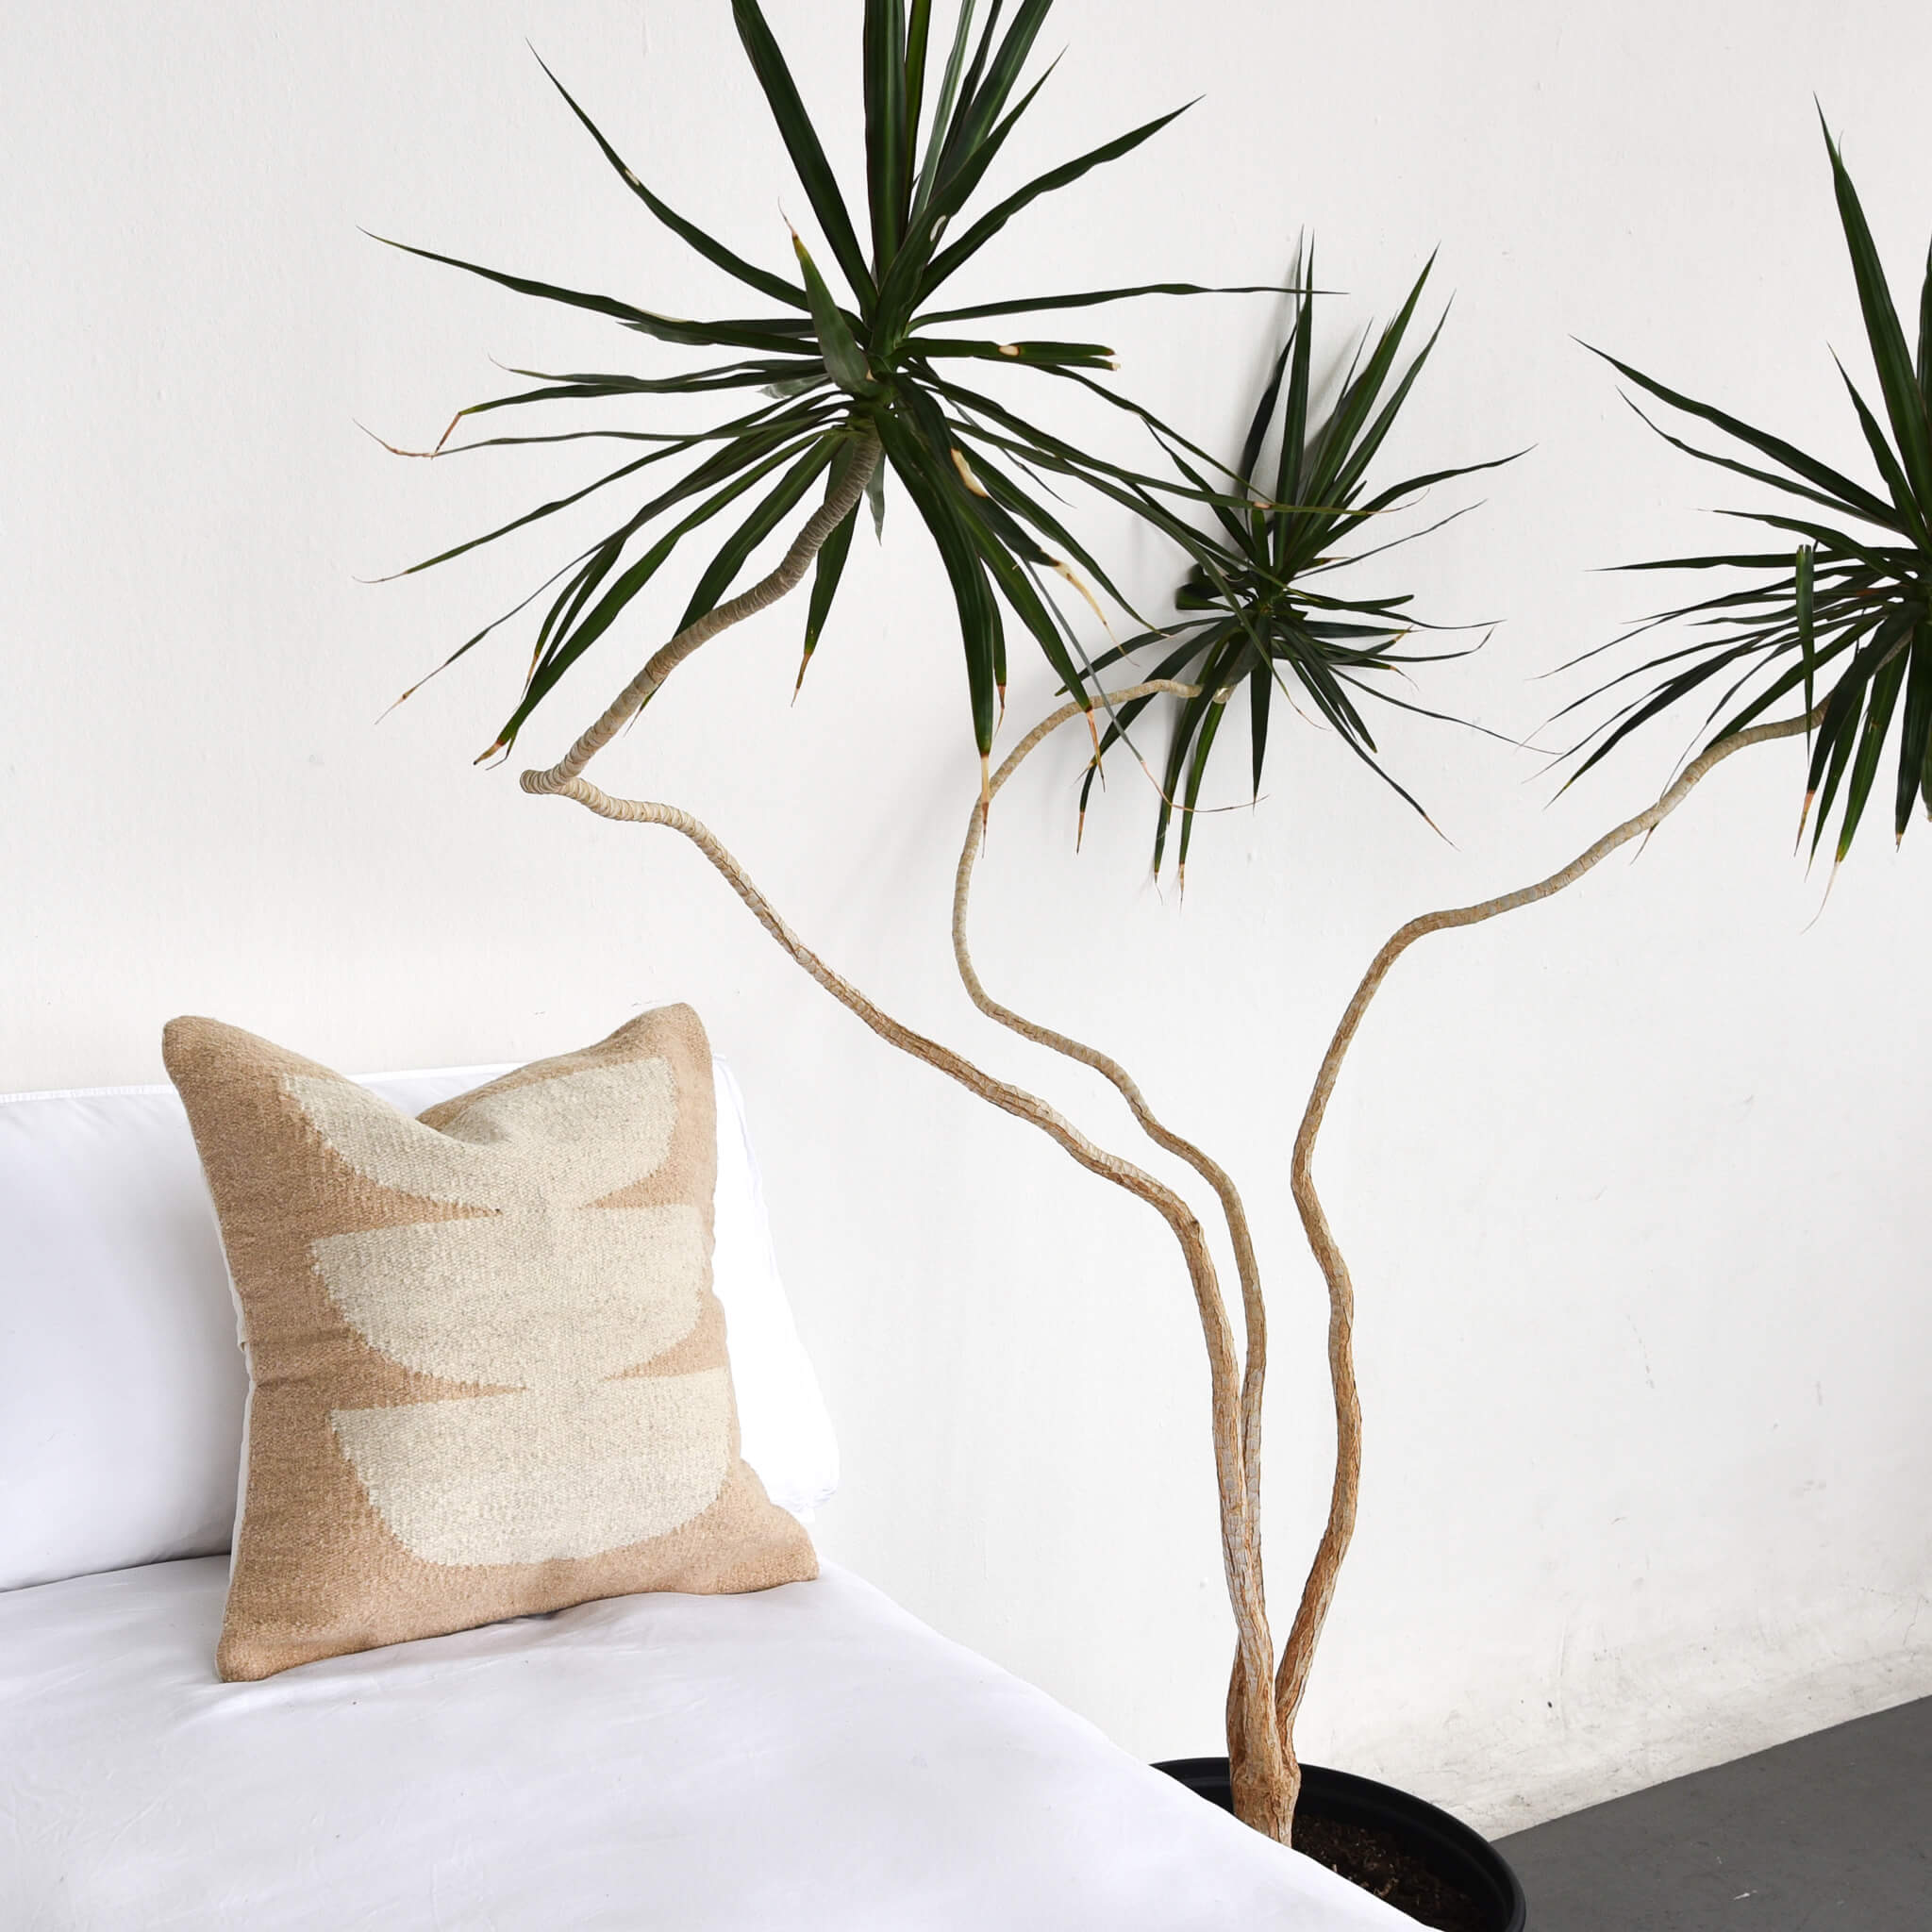 Desert moon throw pillow on a white bed next to a large and sculptural plant.